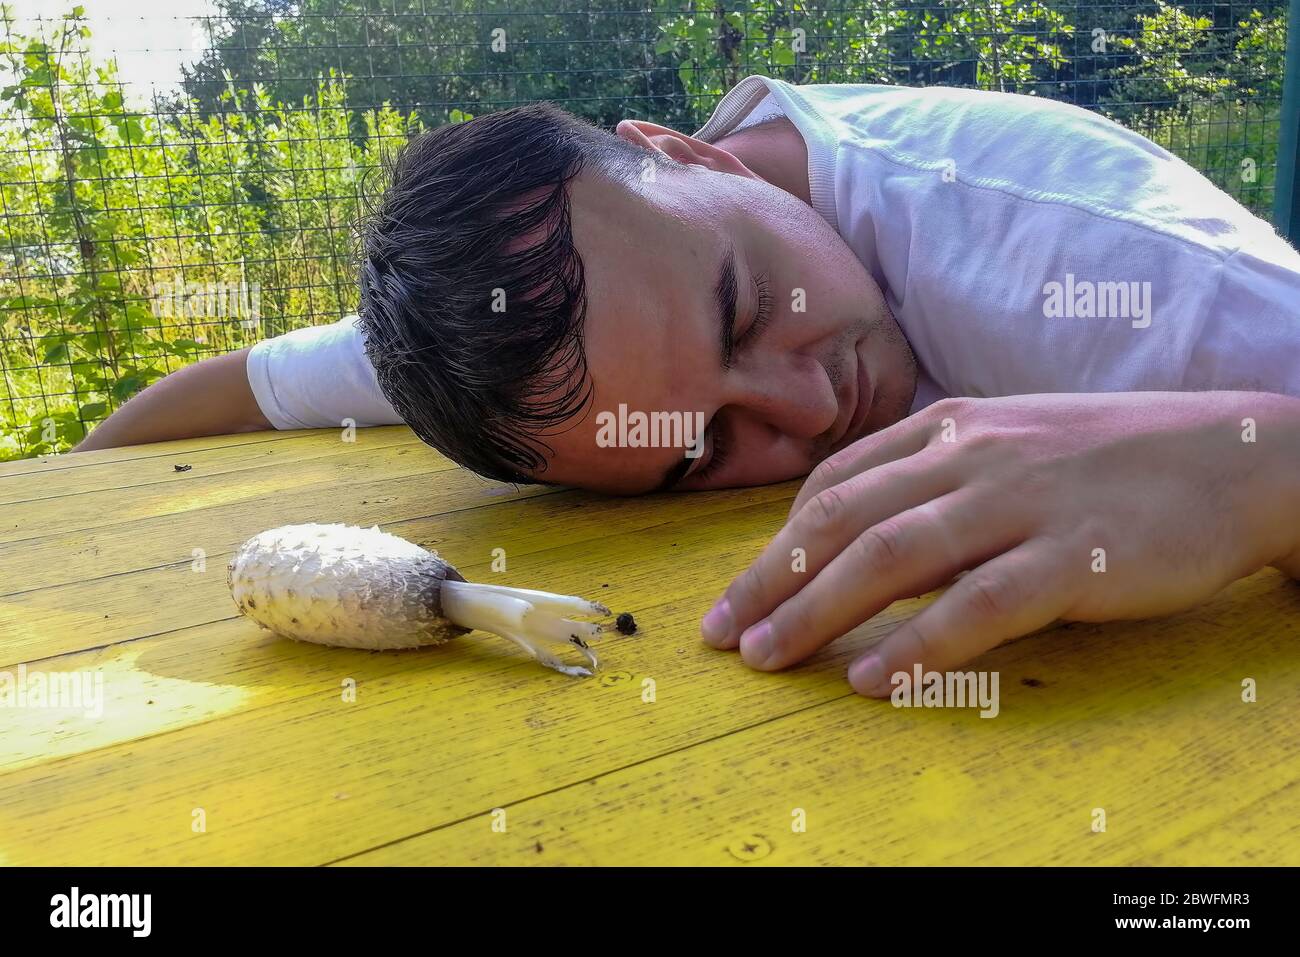 oncpt of poisoning, on a yellow street table lies a poisonous mushroom and an unconscious adult man with his eyes closed, summer sunny day. close-up Stock Photo